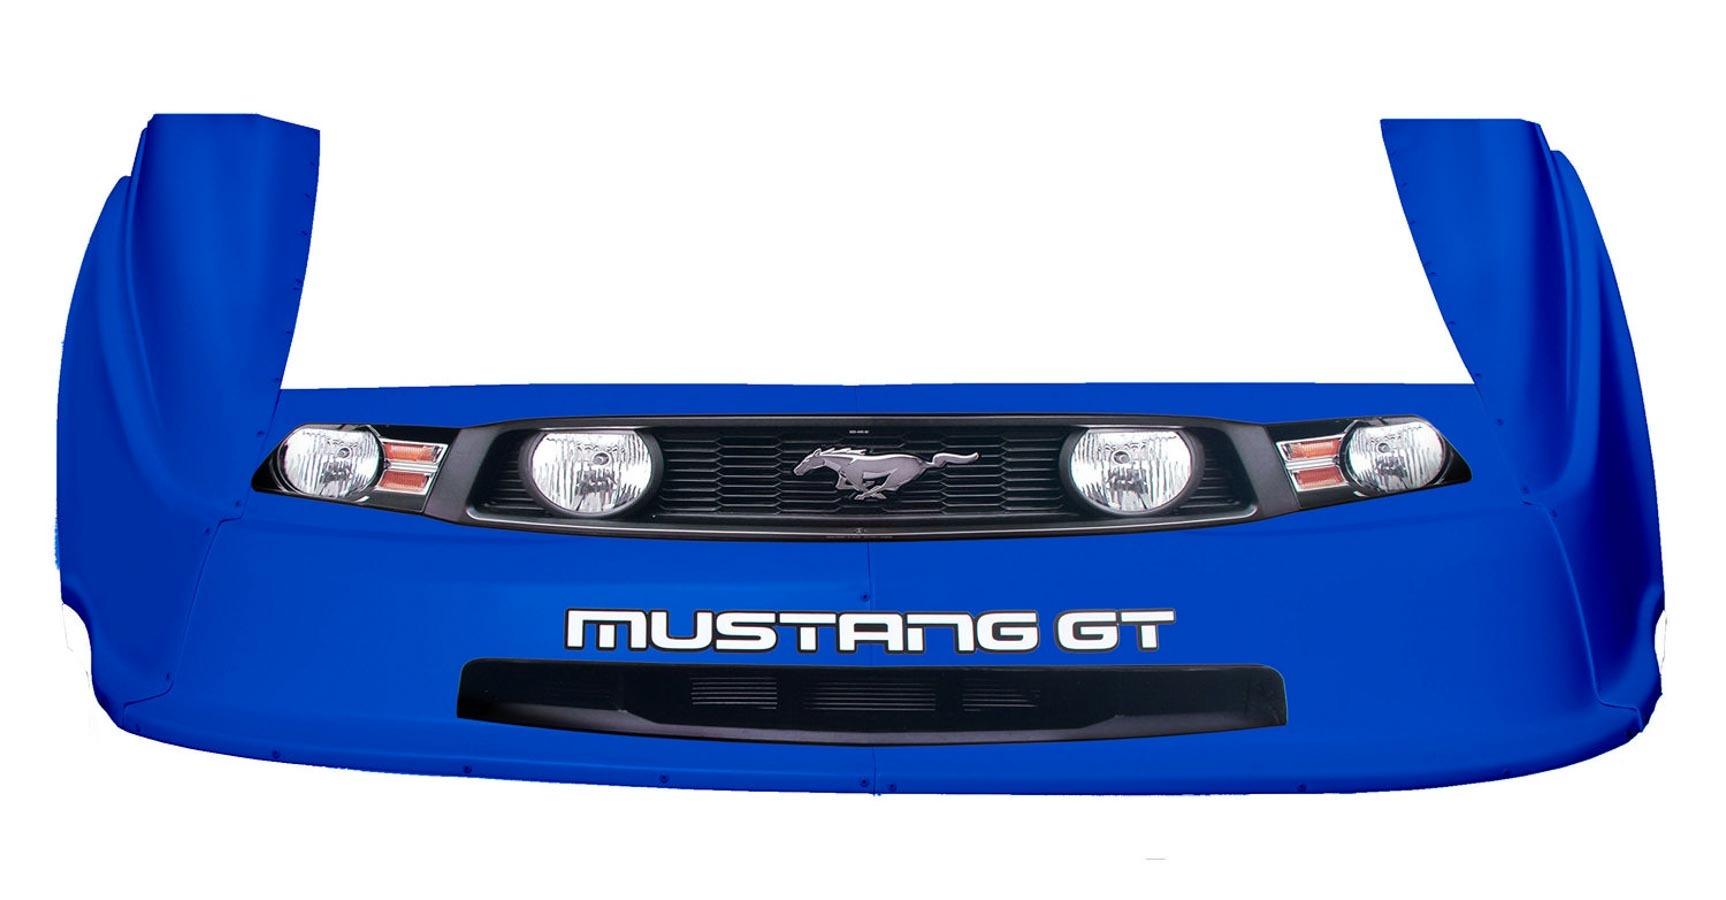 Dirt MD3 Combo Chev Blue 2010 Mustang - Burlile Performance Products